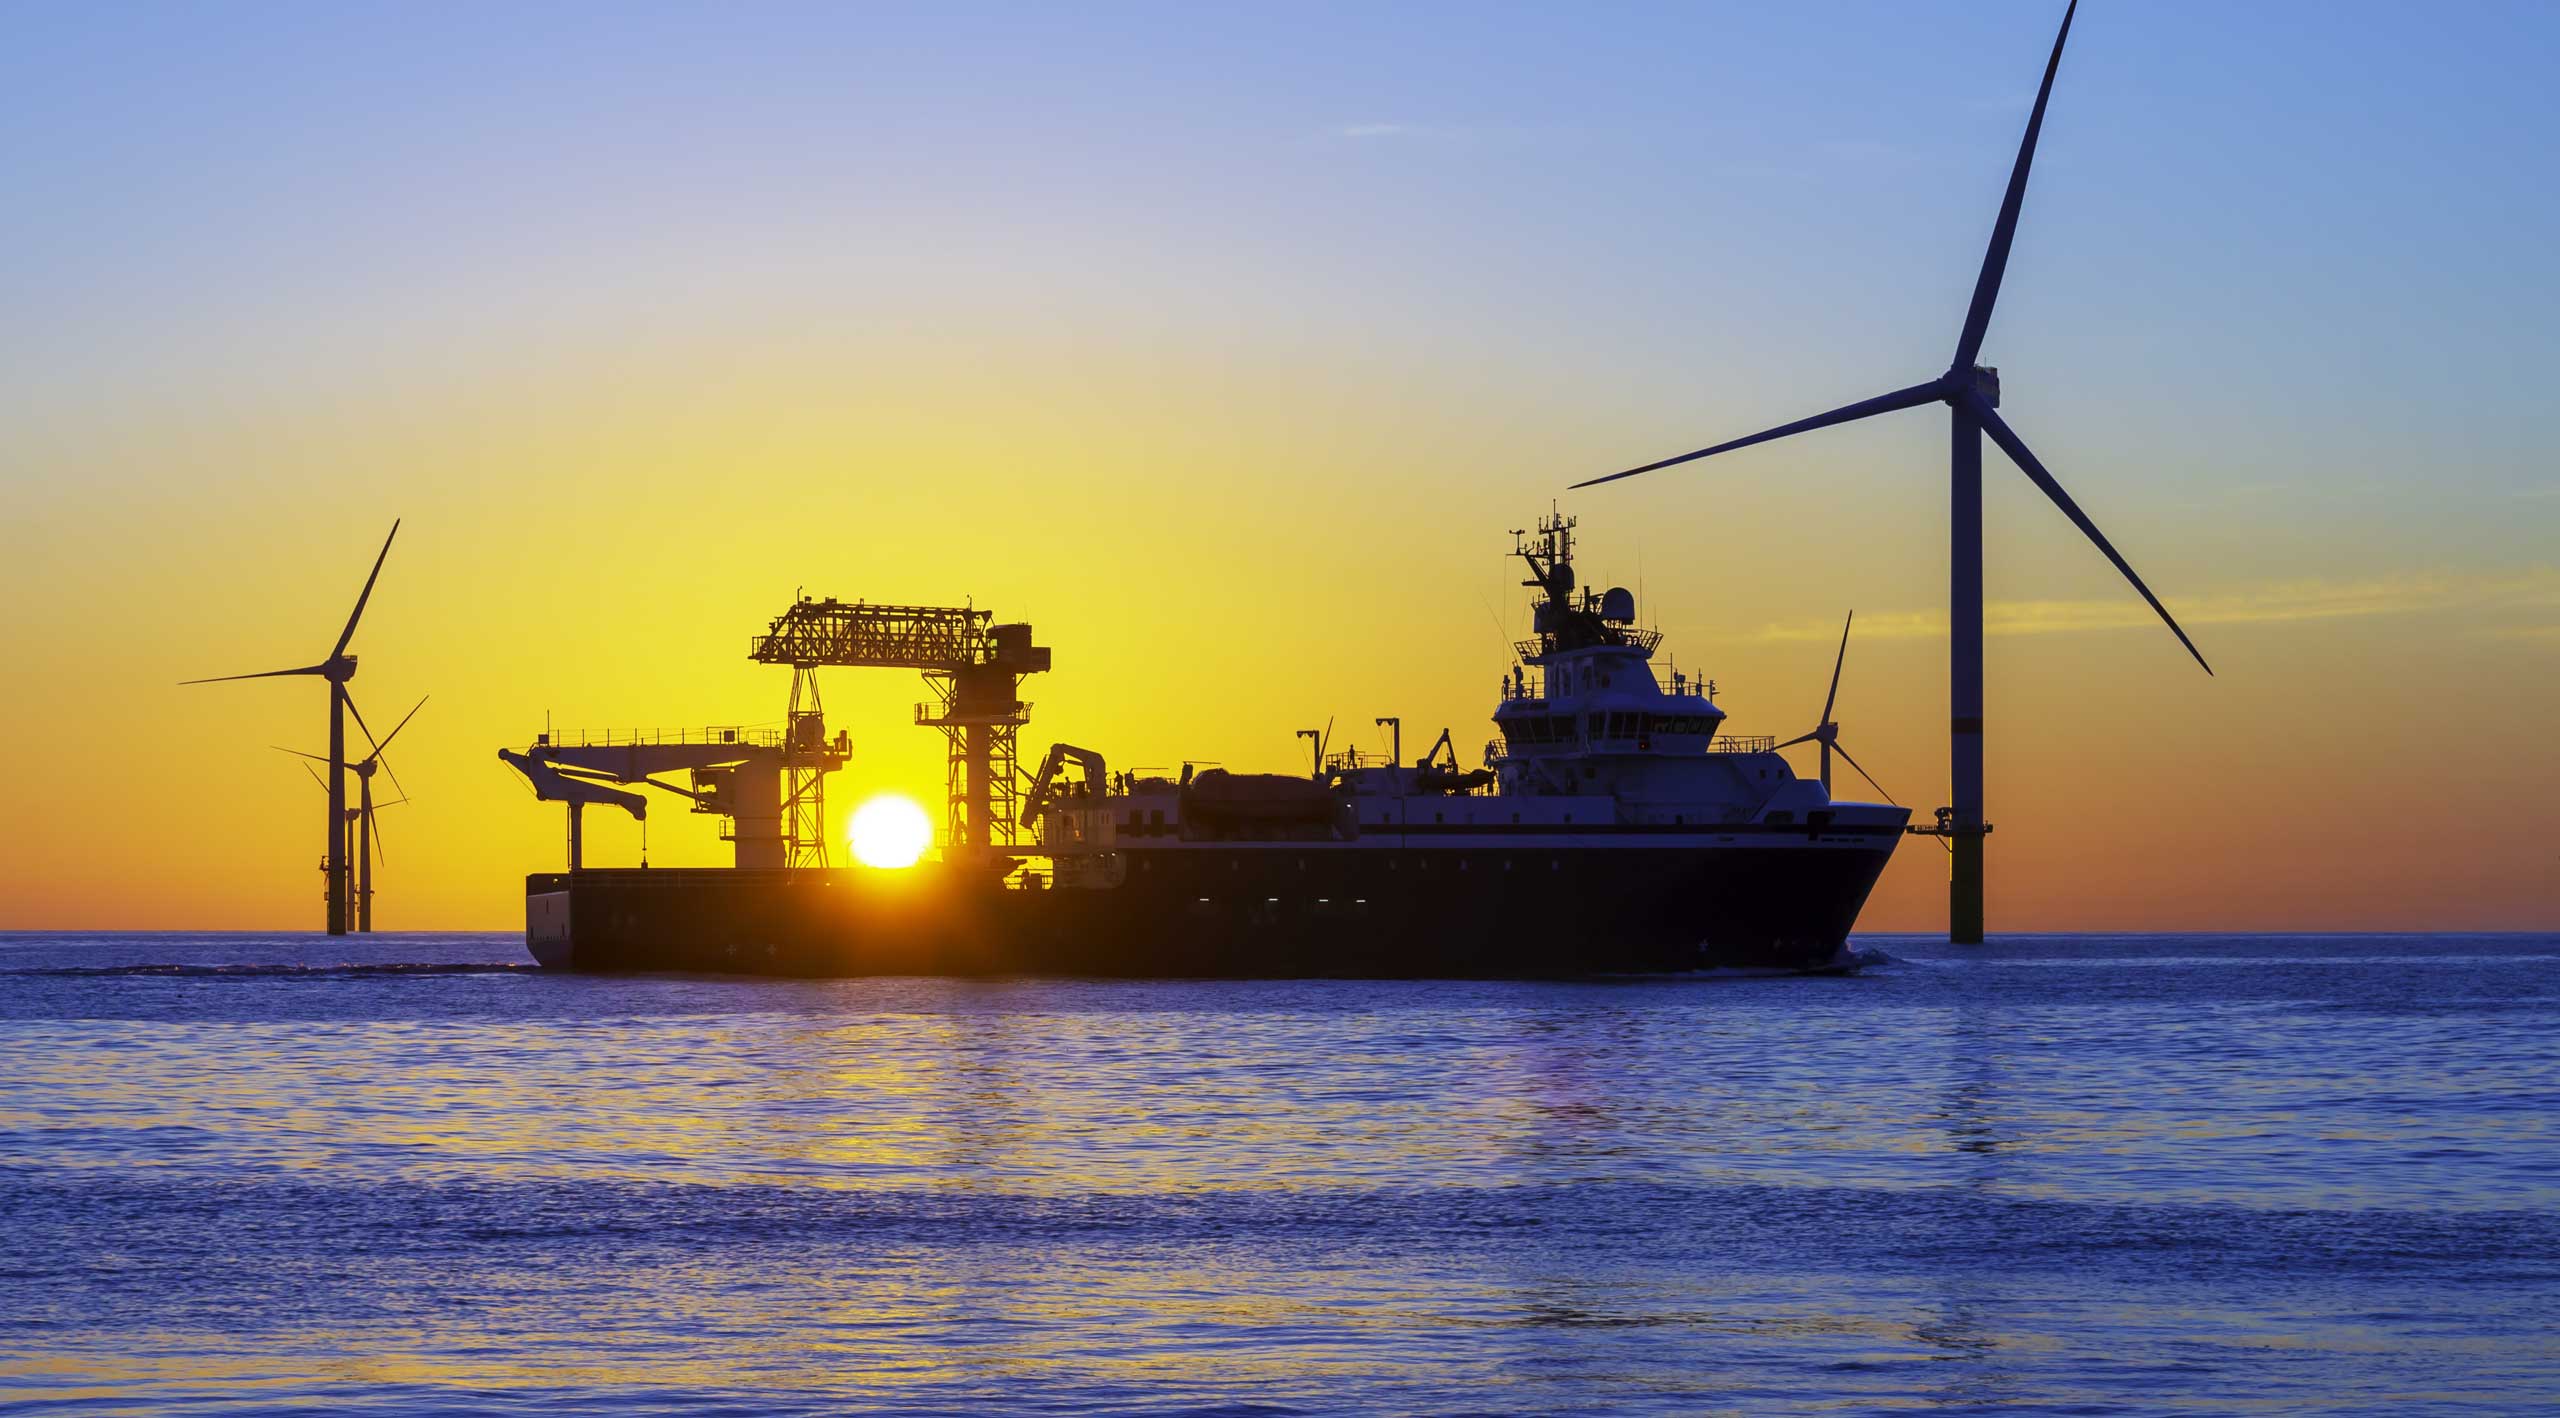 Offshore wind turbines and ship